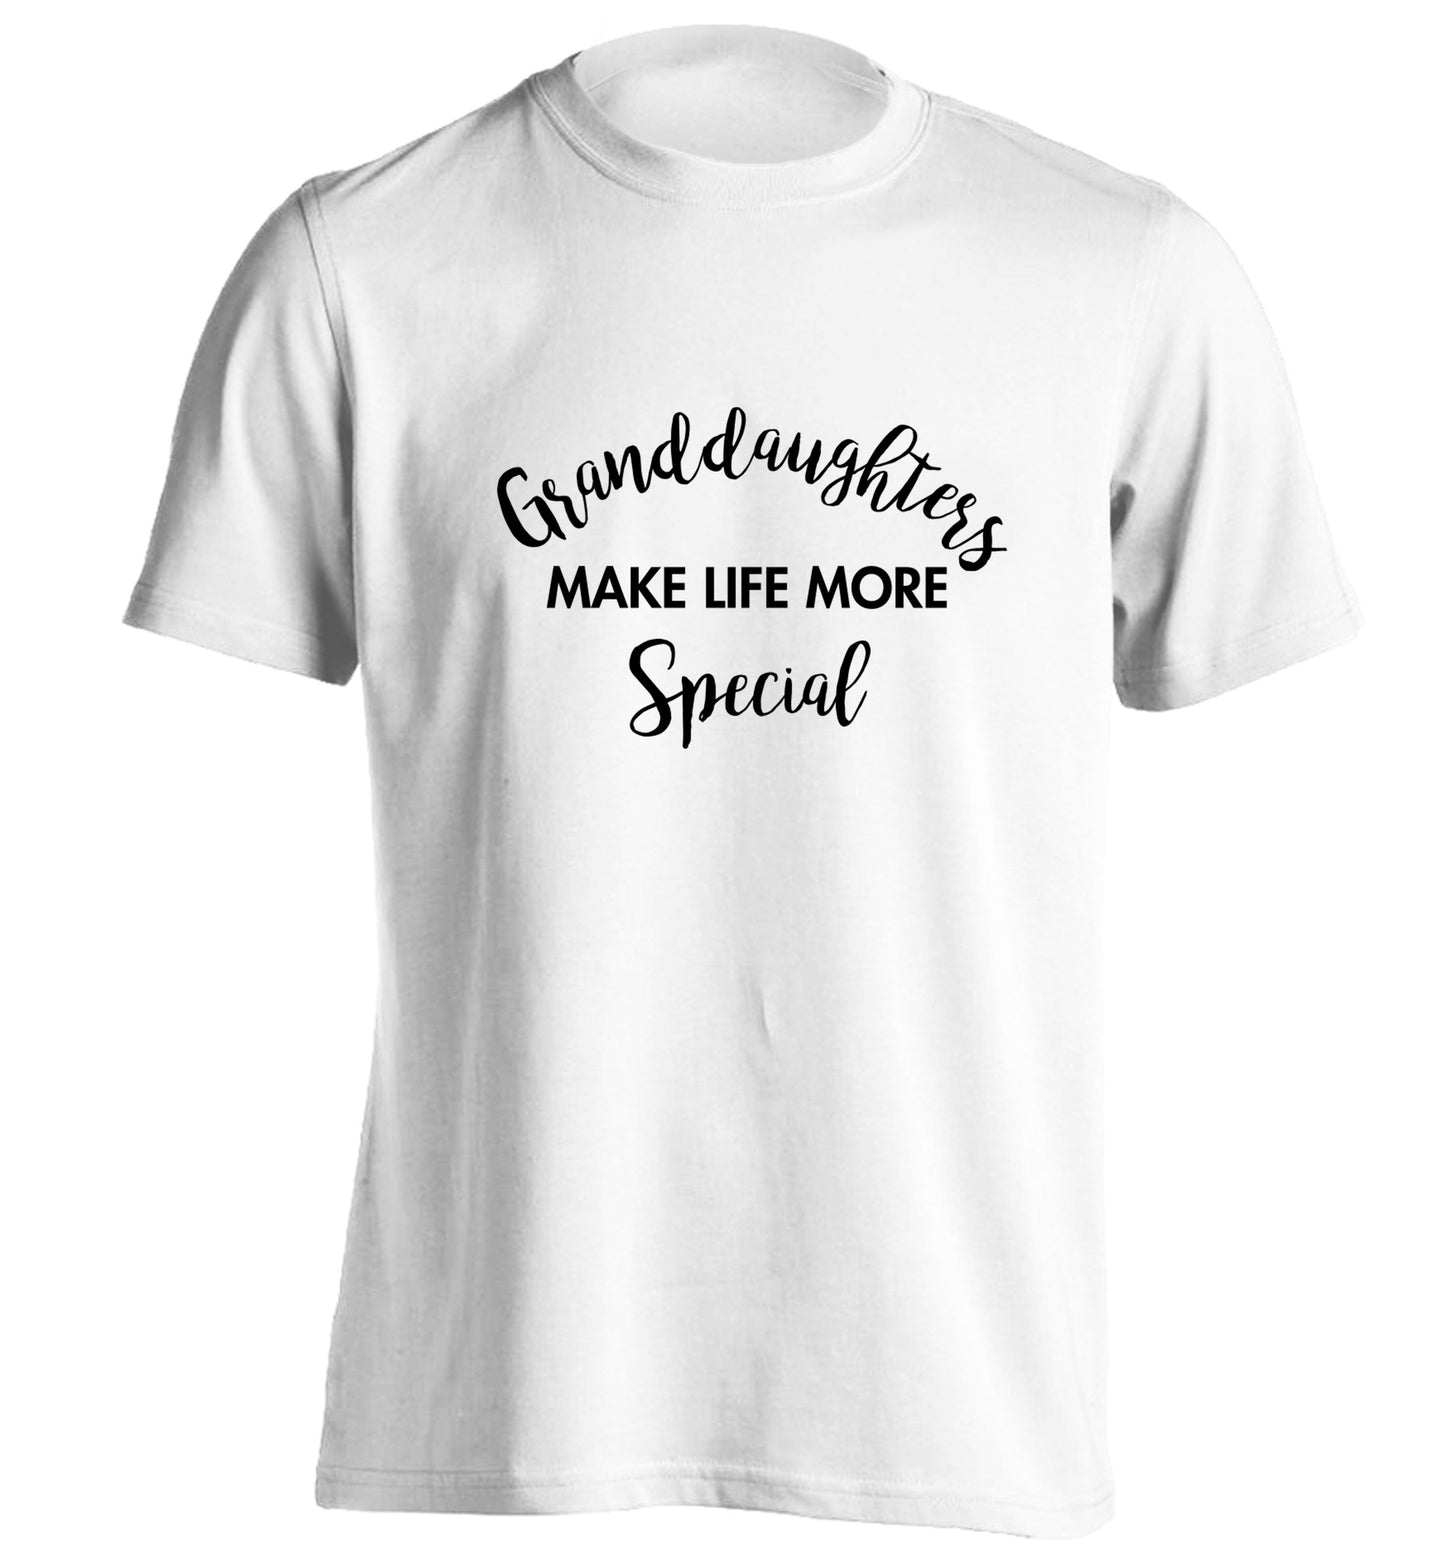 Granddaughters make life more special adults unisex white Tshirt 2XL